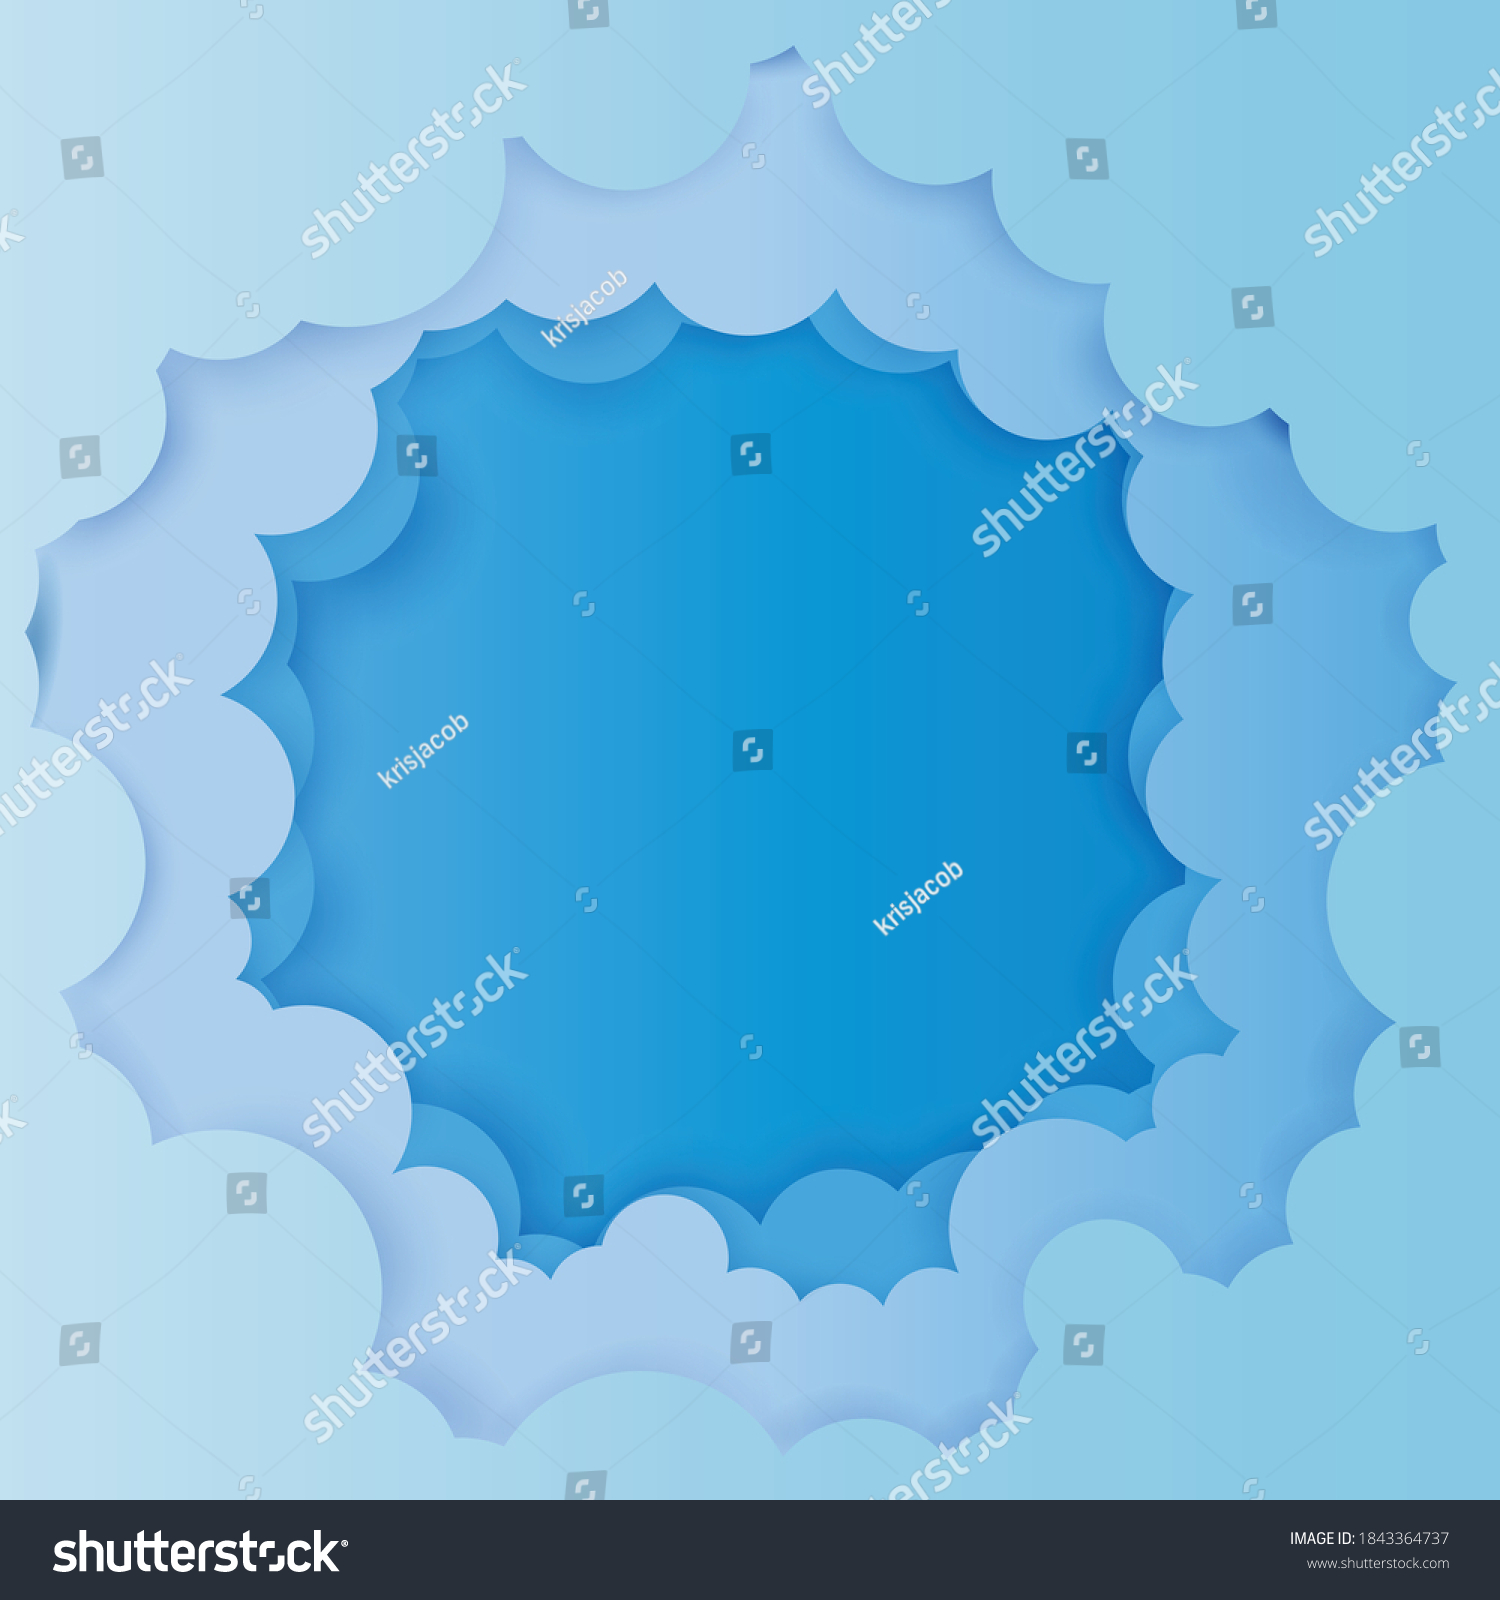 Blue Sky Clouds Cartoon Background Bright Stock Vector Royalty Free 1843364737 Shutterstock 7203